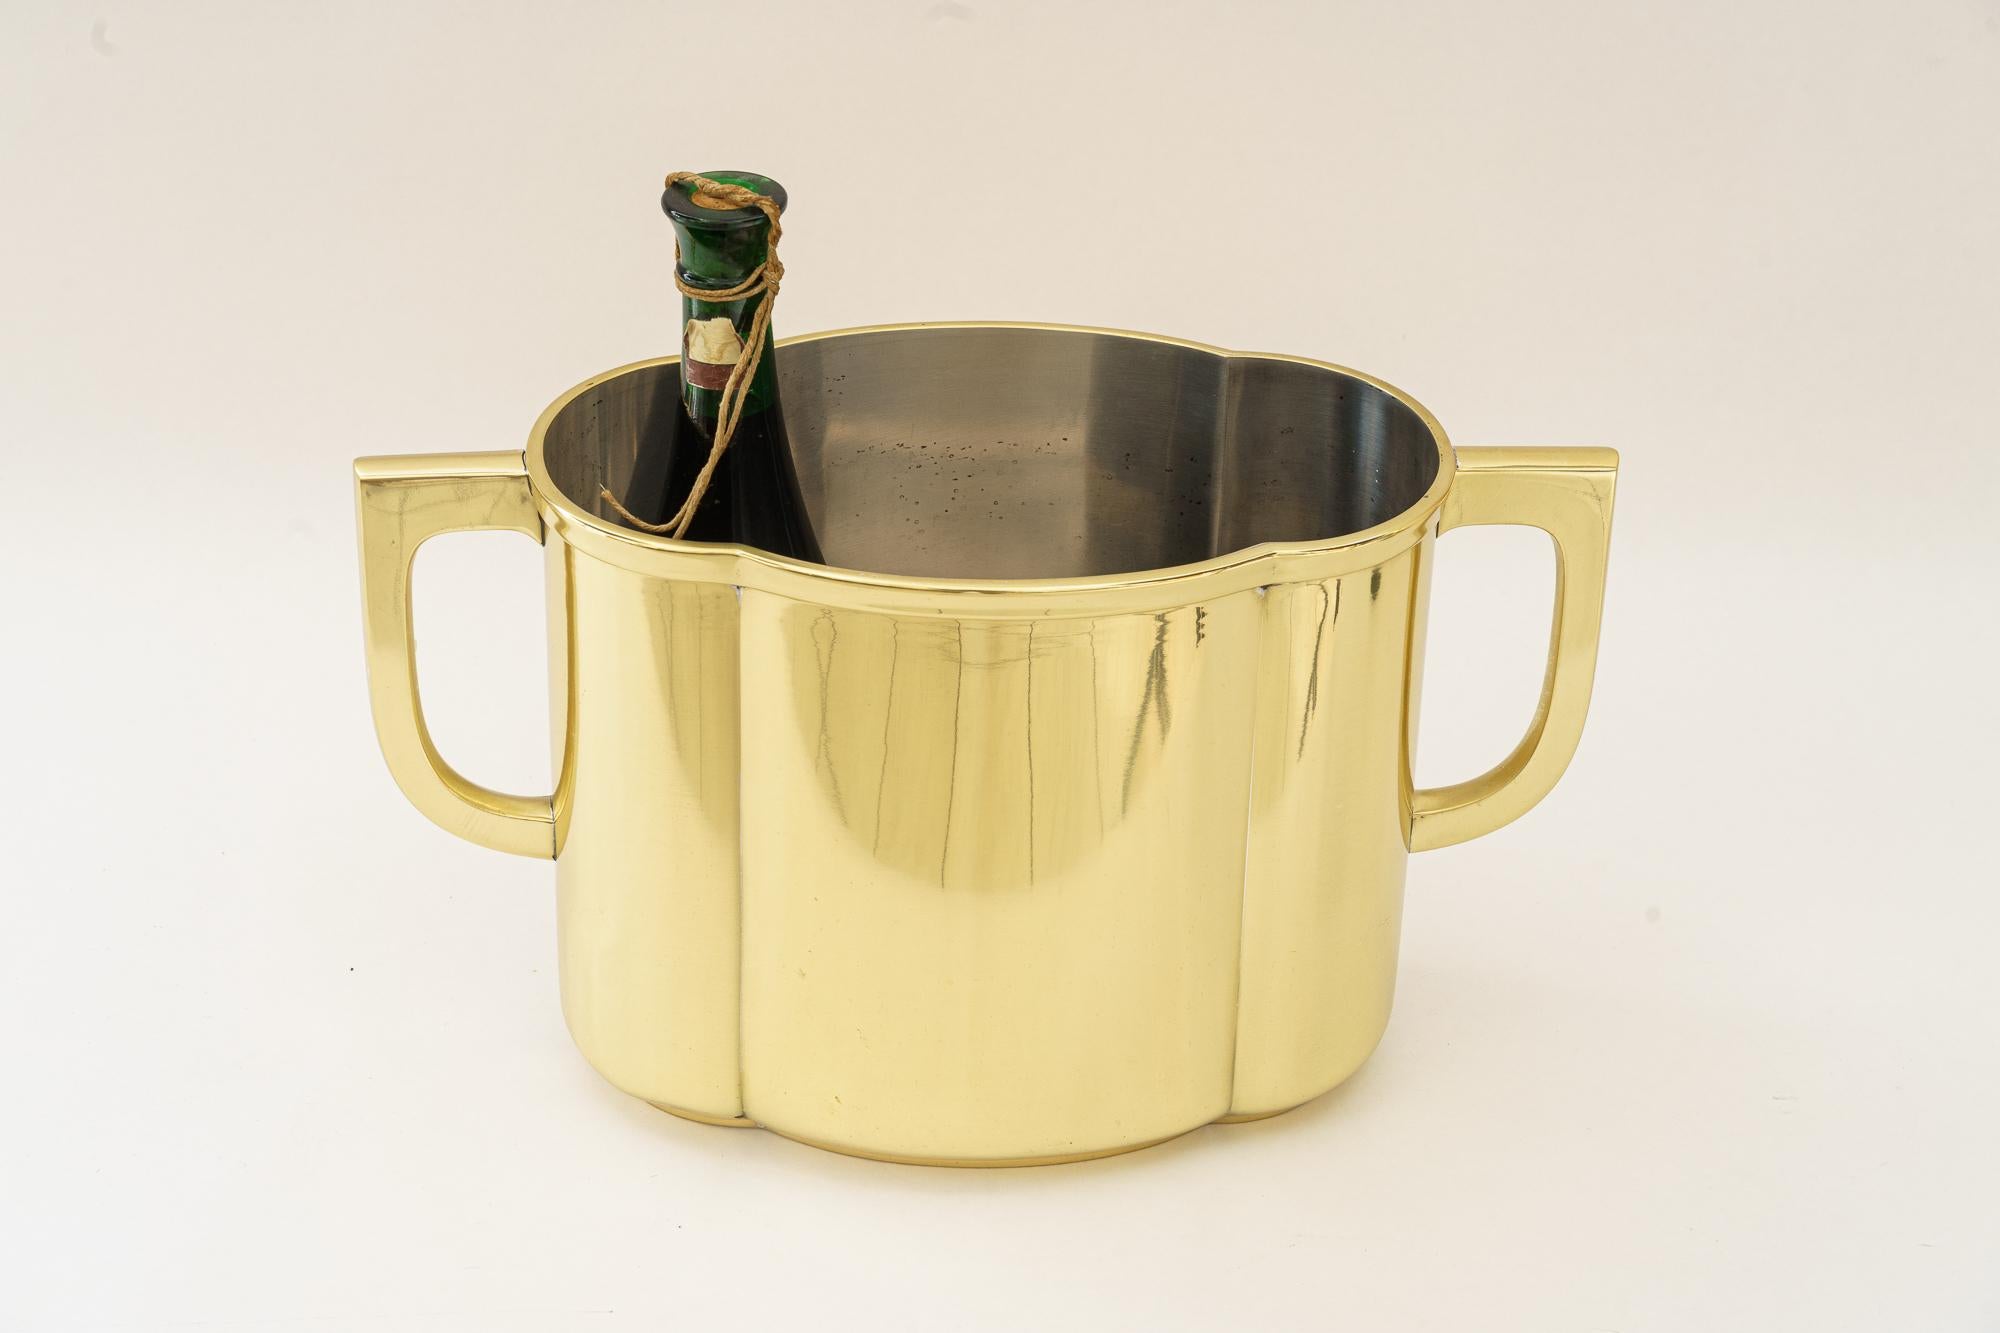 WMF Art Deco Champagne Cooler, for 3 bottles Vienna Around 1920s
Rare model
Brass polished and stove enameled
Marked on Bottom
